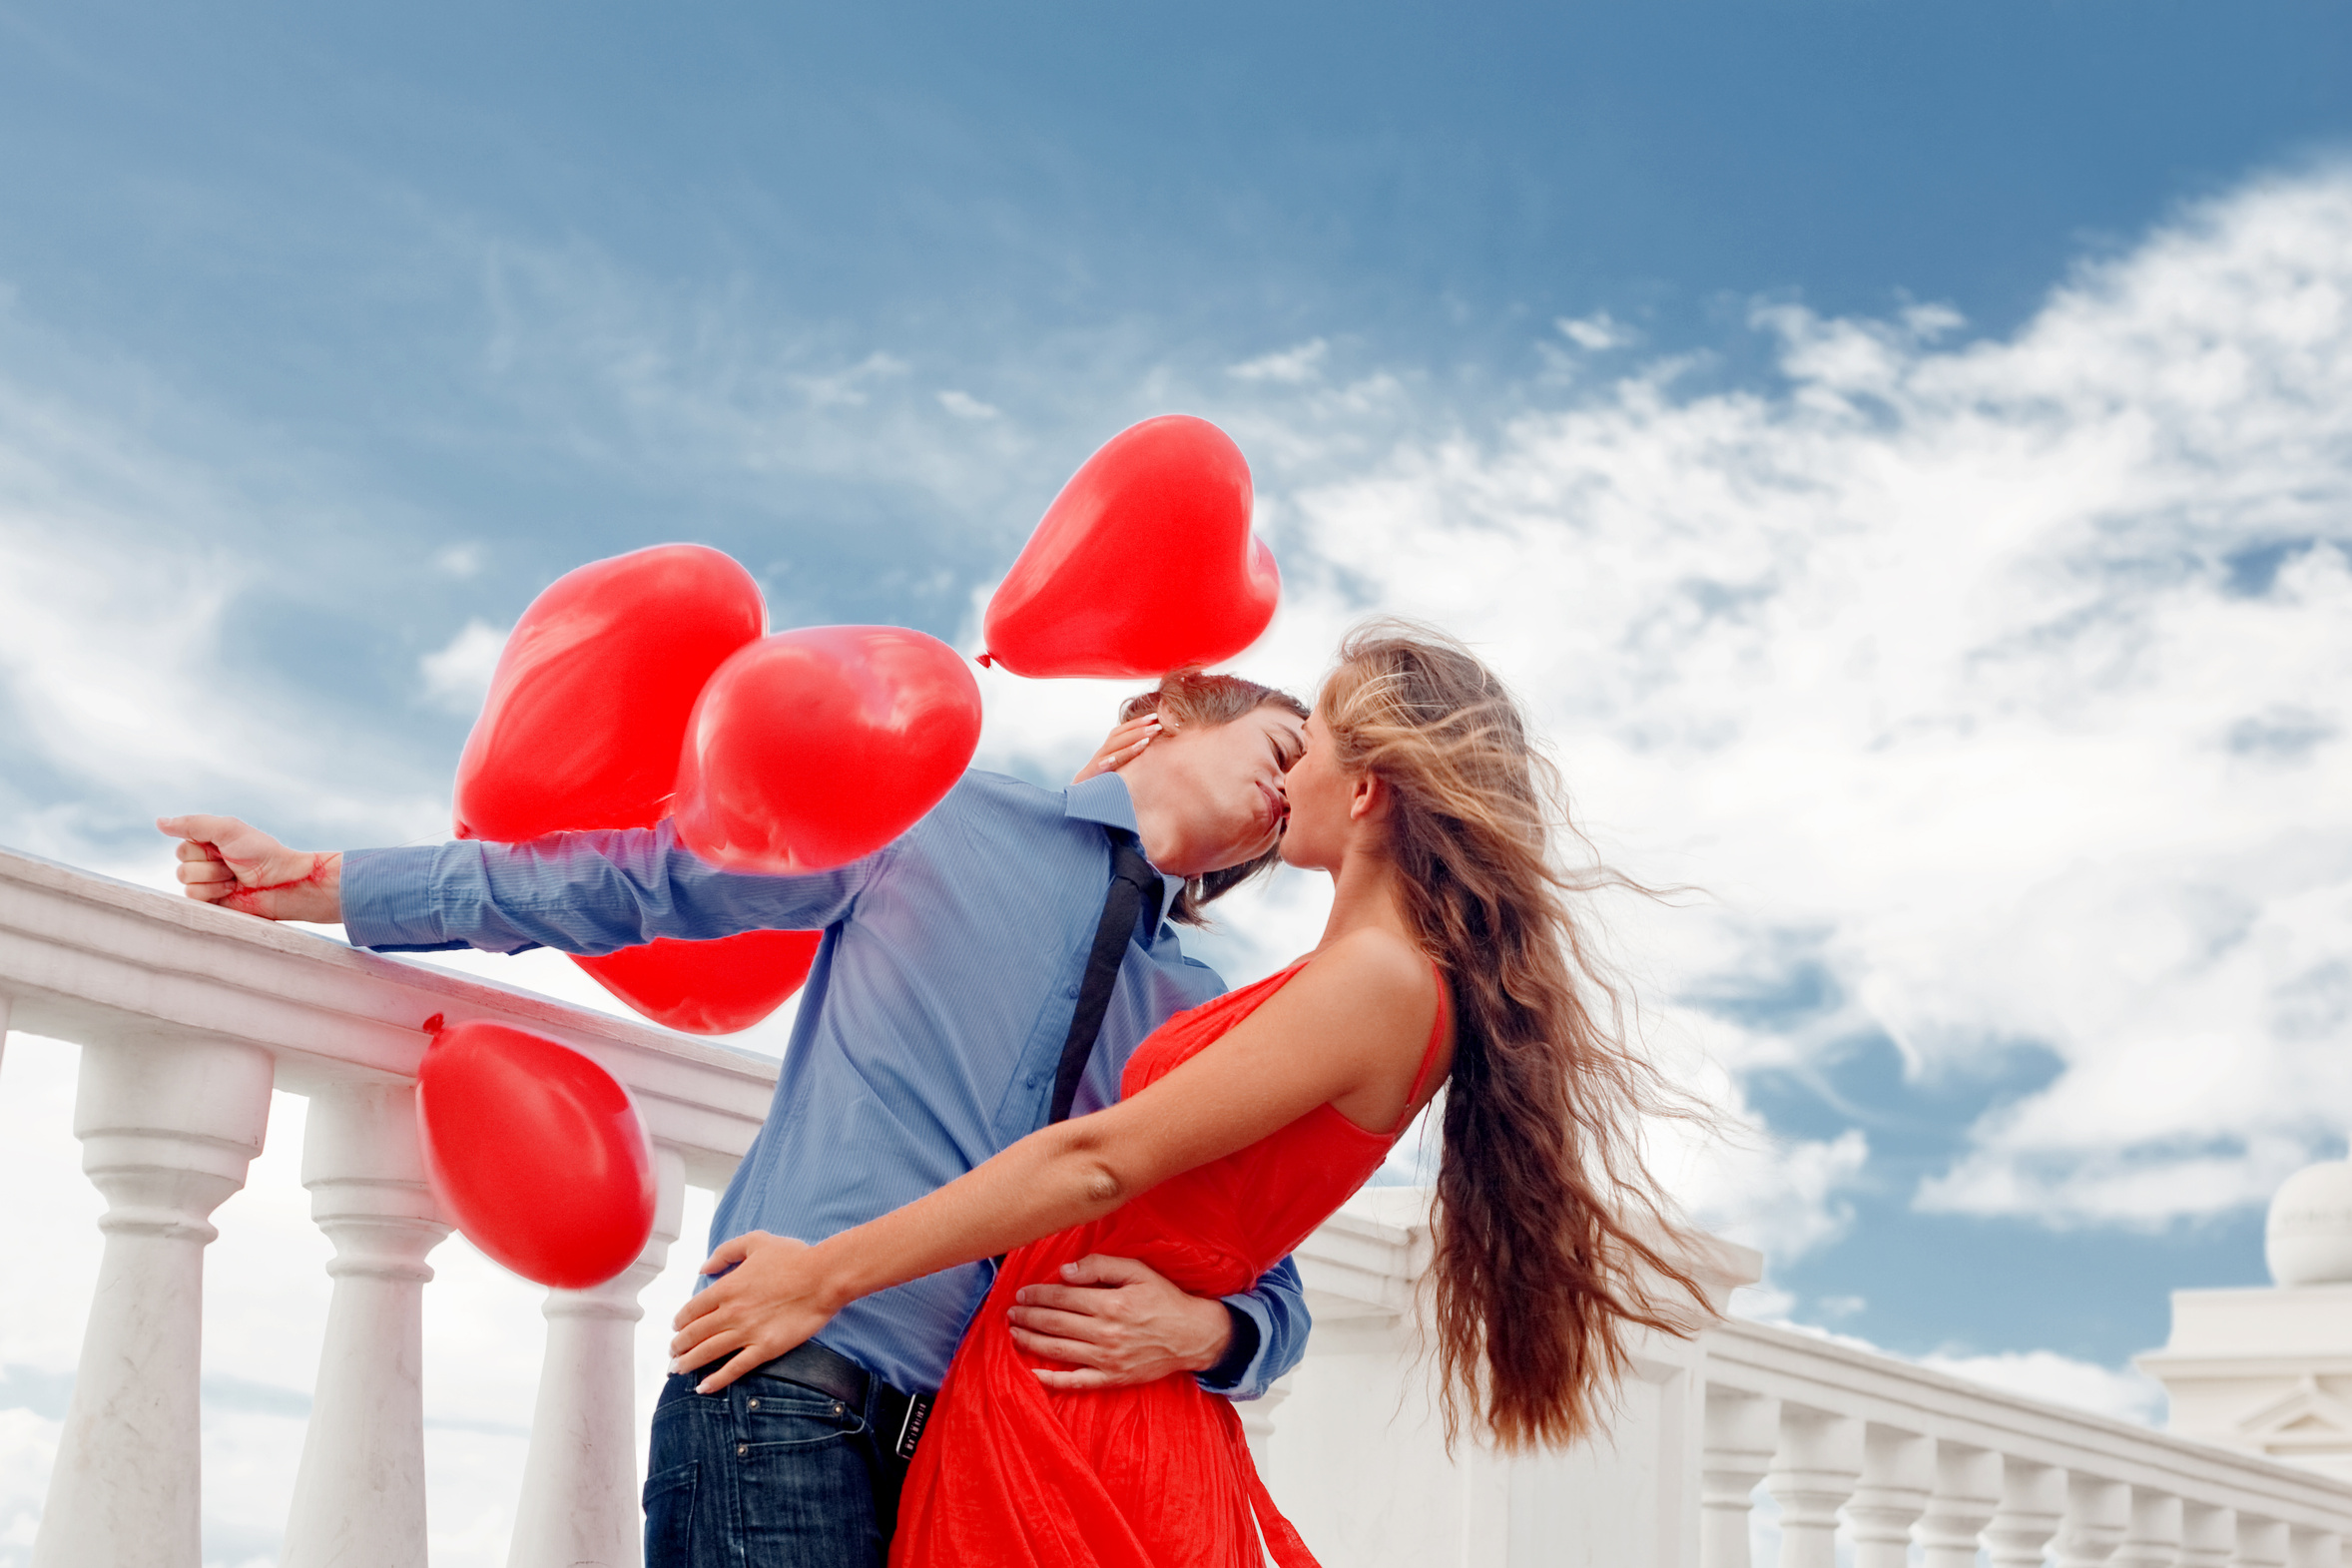 Teenage couple embracing over sky and holding bunch of baloons-hearts